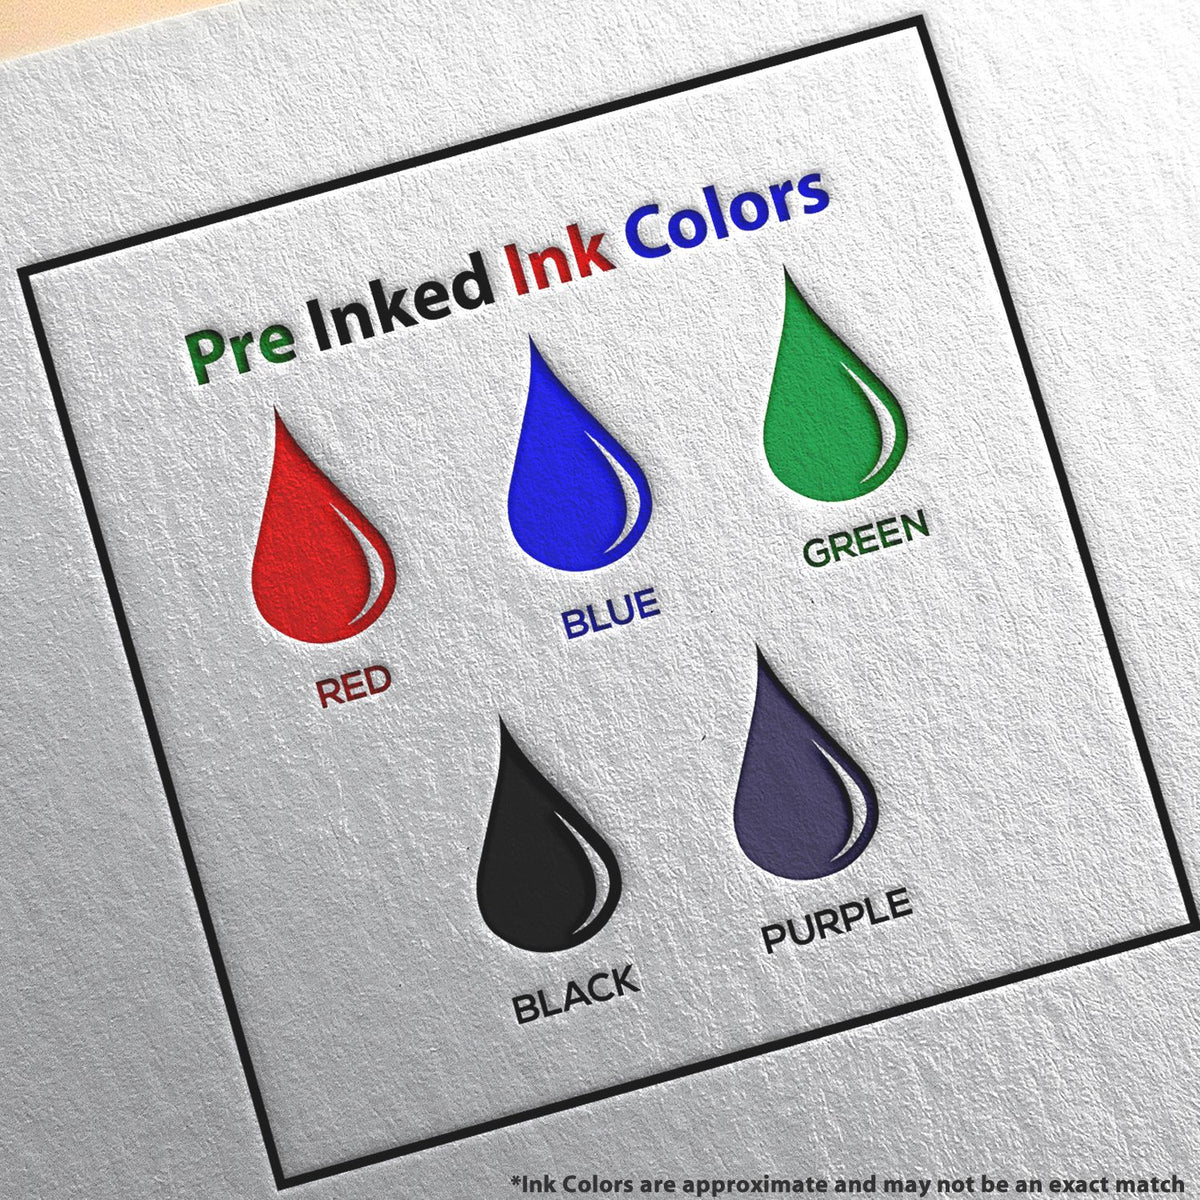 A picture showing the different ink colors or hues available for the Slim Pre-Inked Alabama Landscape Architect Seal Stamp product.